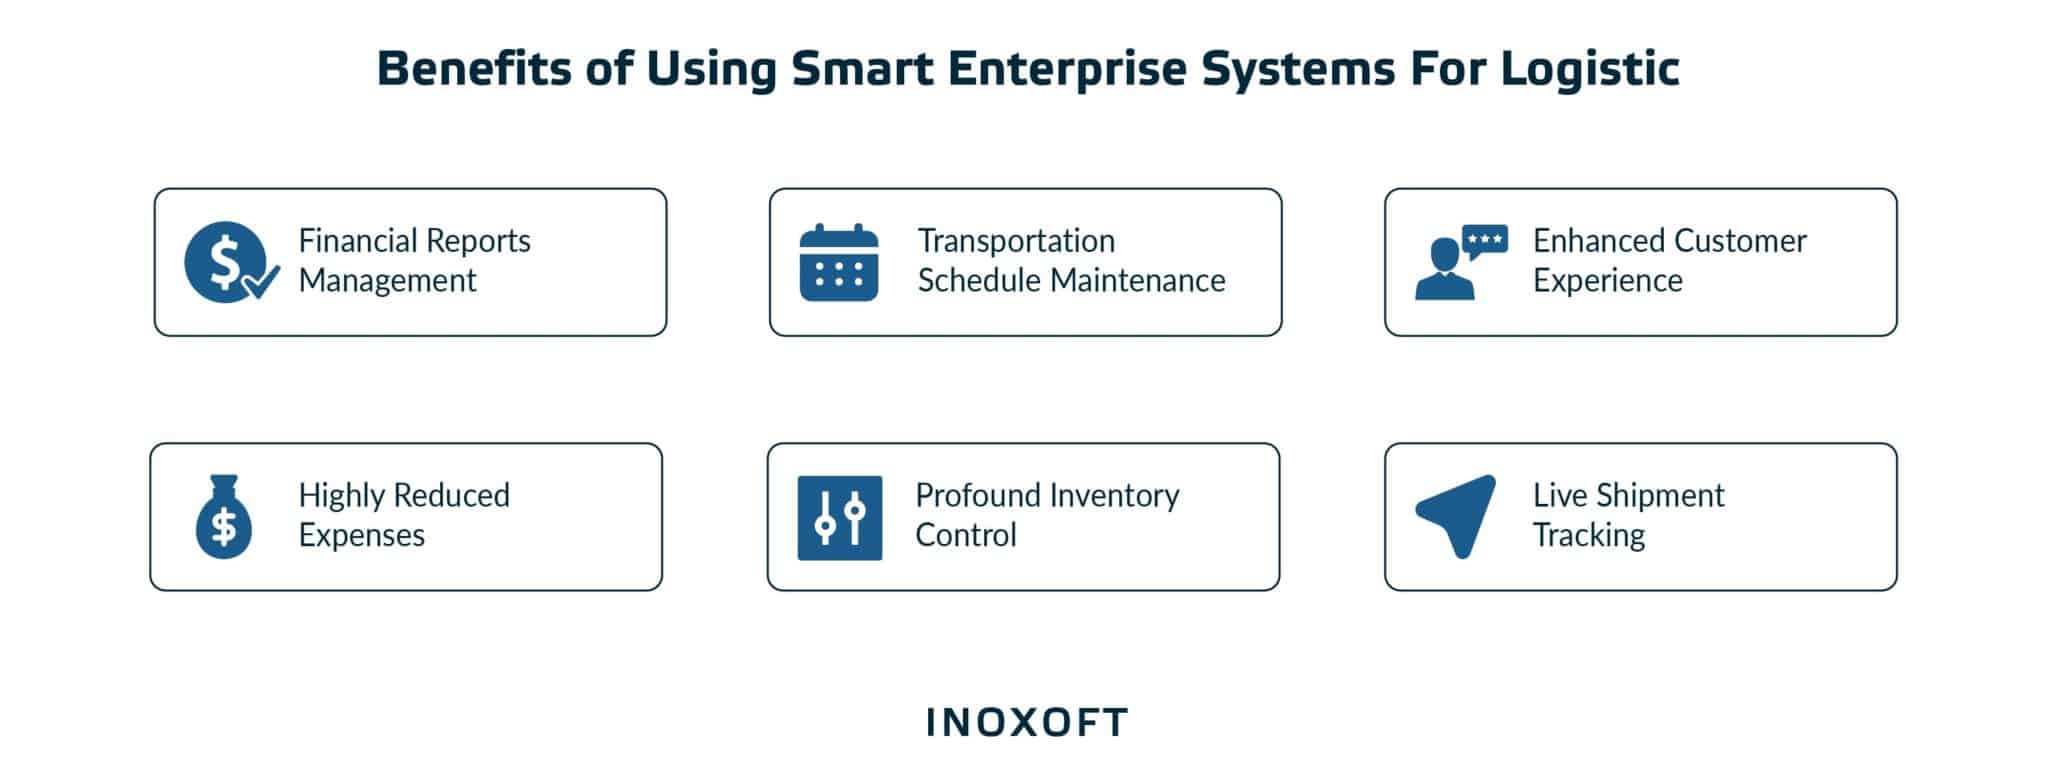 6 Benefits of Smart Enterprise System for Logistic Company